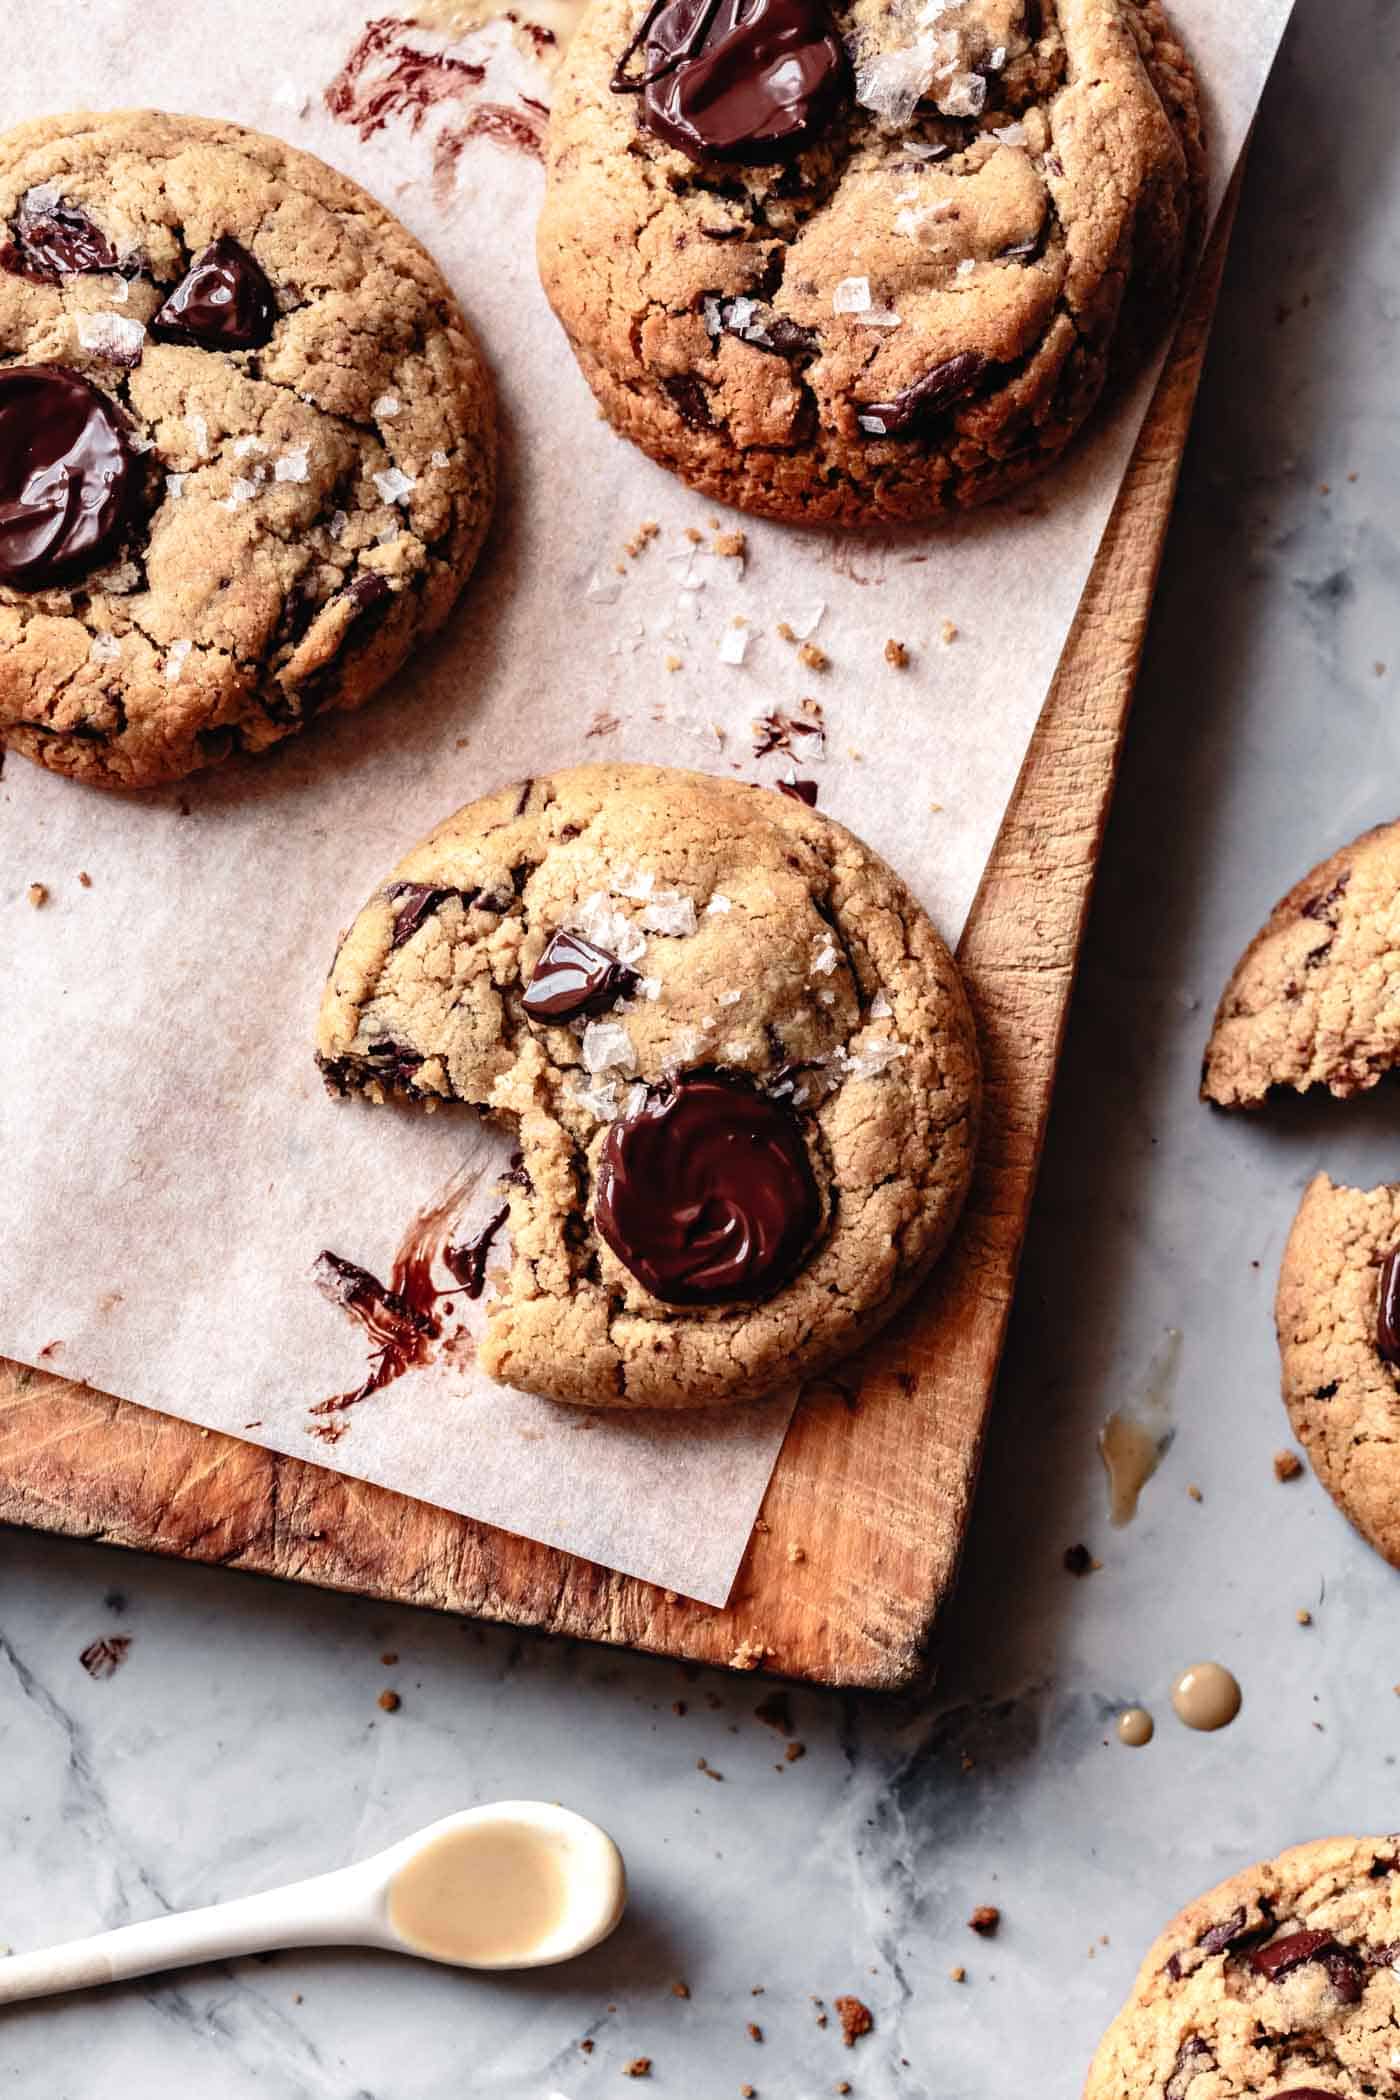 A tahini chocolate chunk cookie with a bite taken out sits on a wooden board